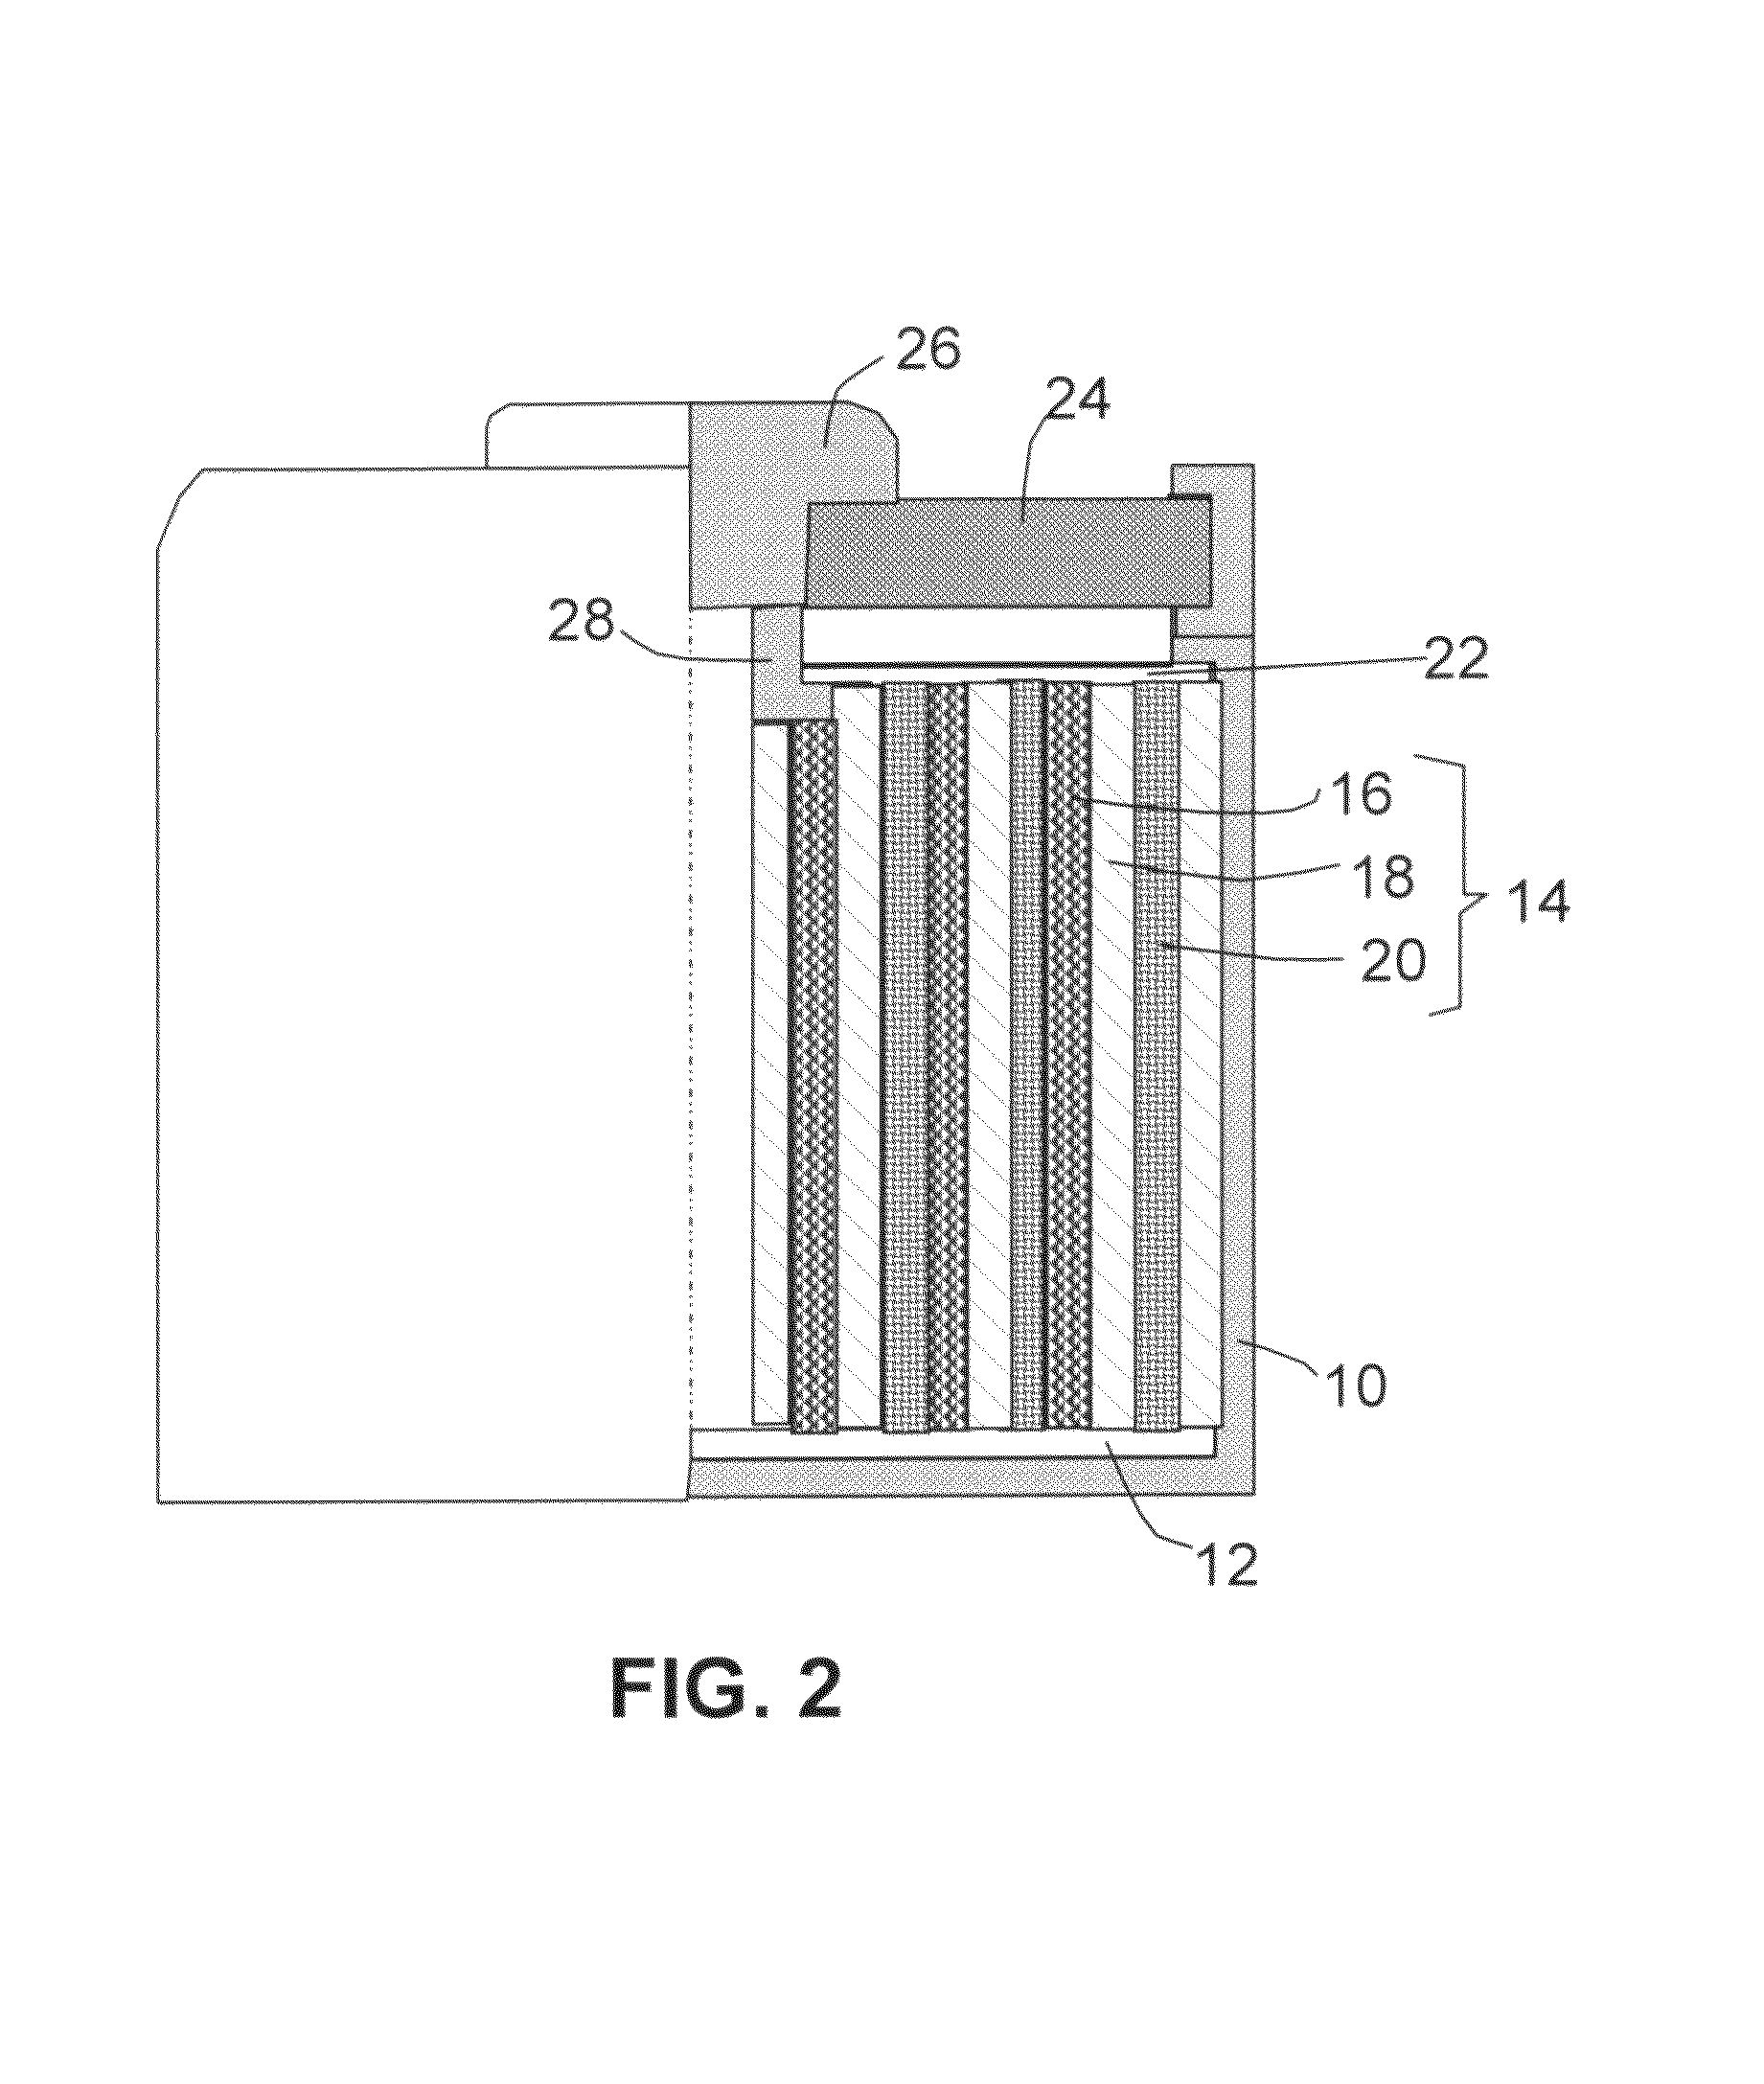 Method of producing hybrid nano-filament electrodes for lithium metal or lithium ion batteries